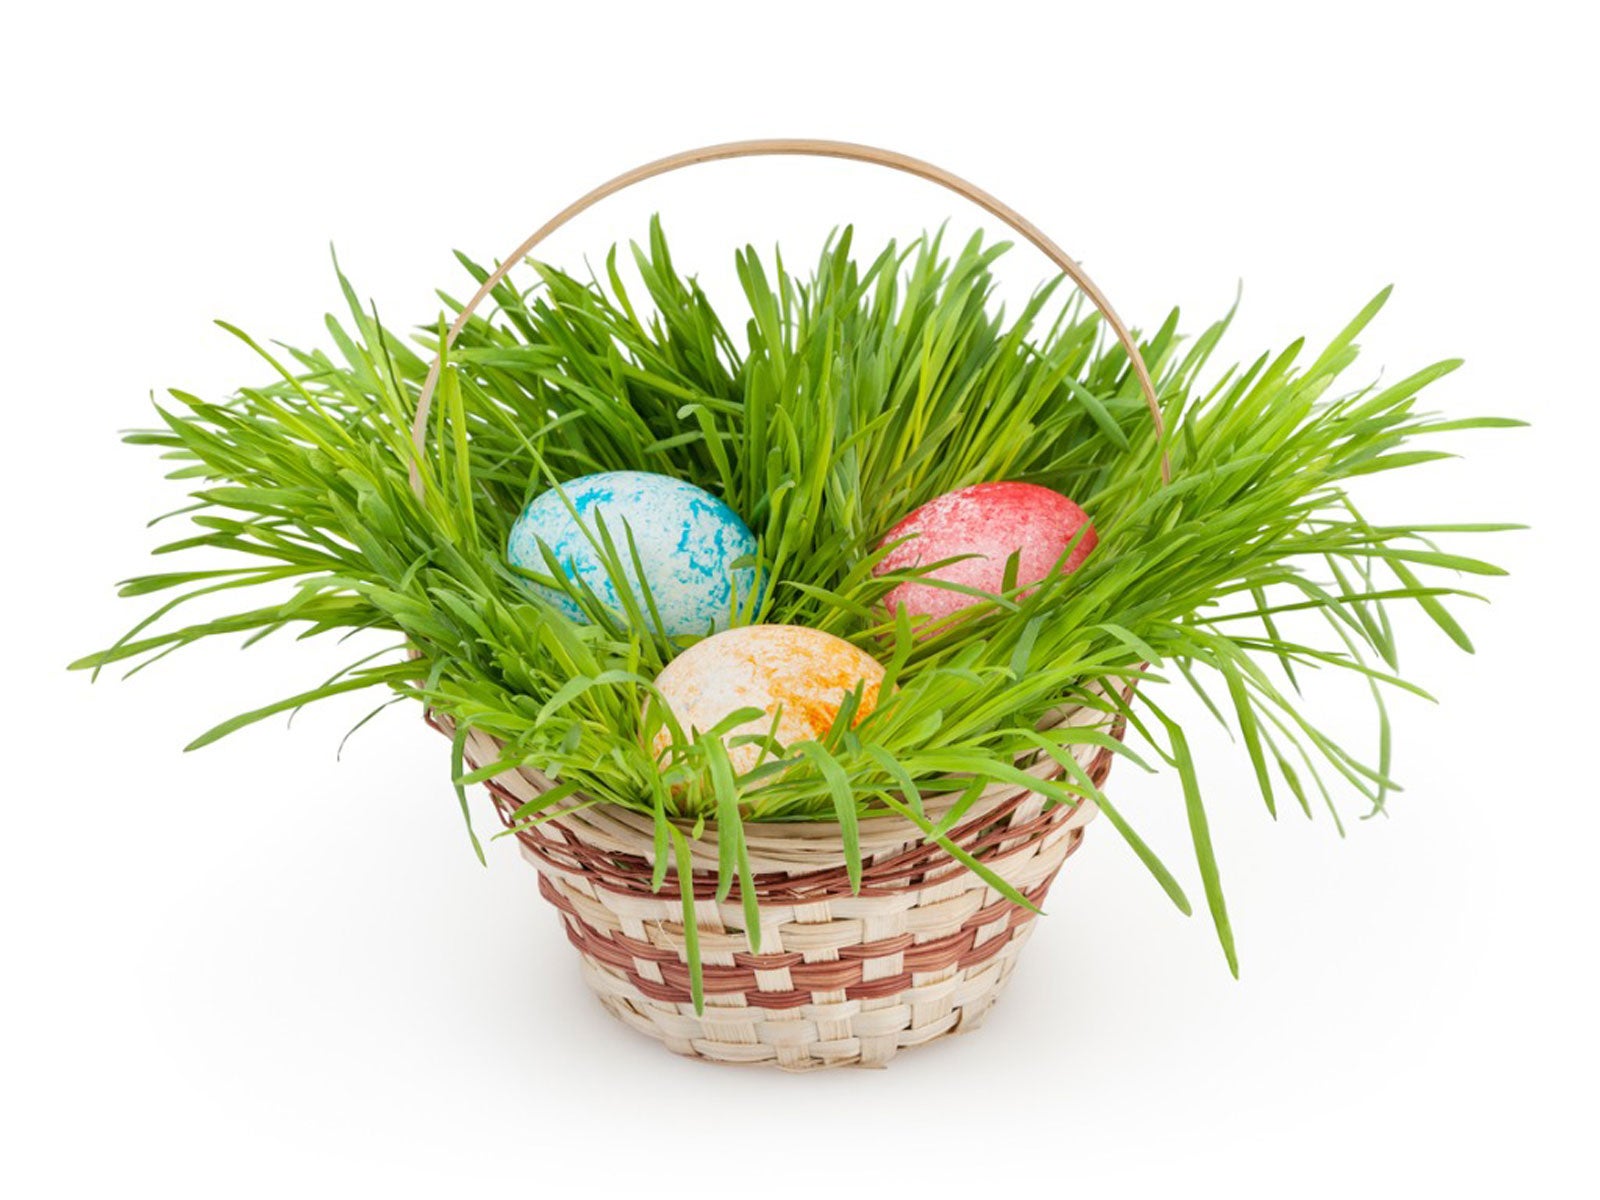 Sisal Easter Grass for Baskets and Crafts ~ Green